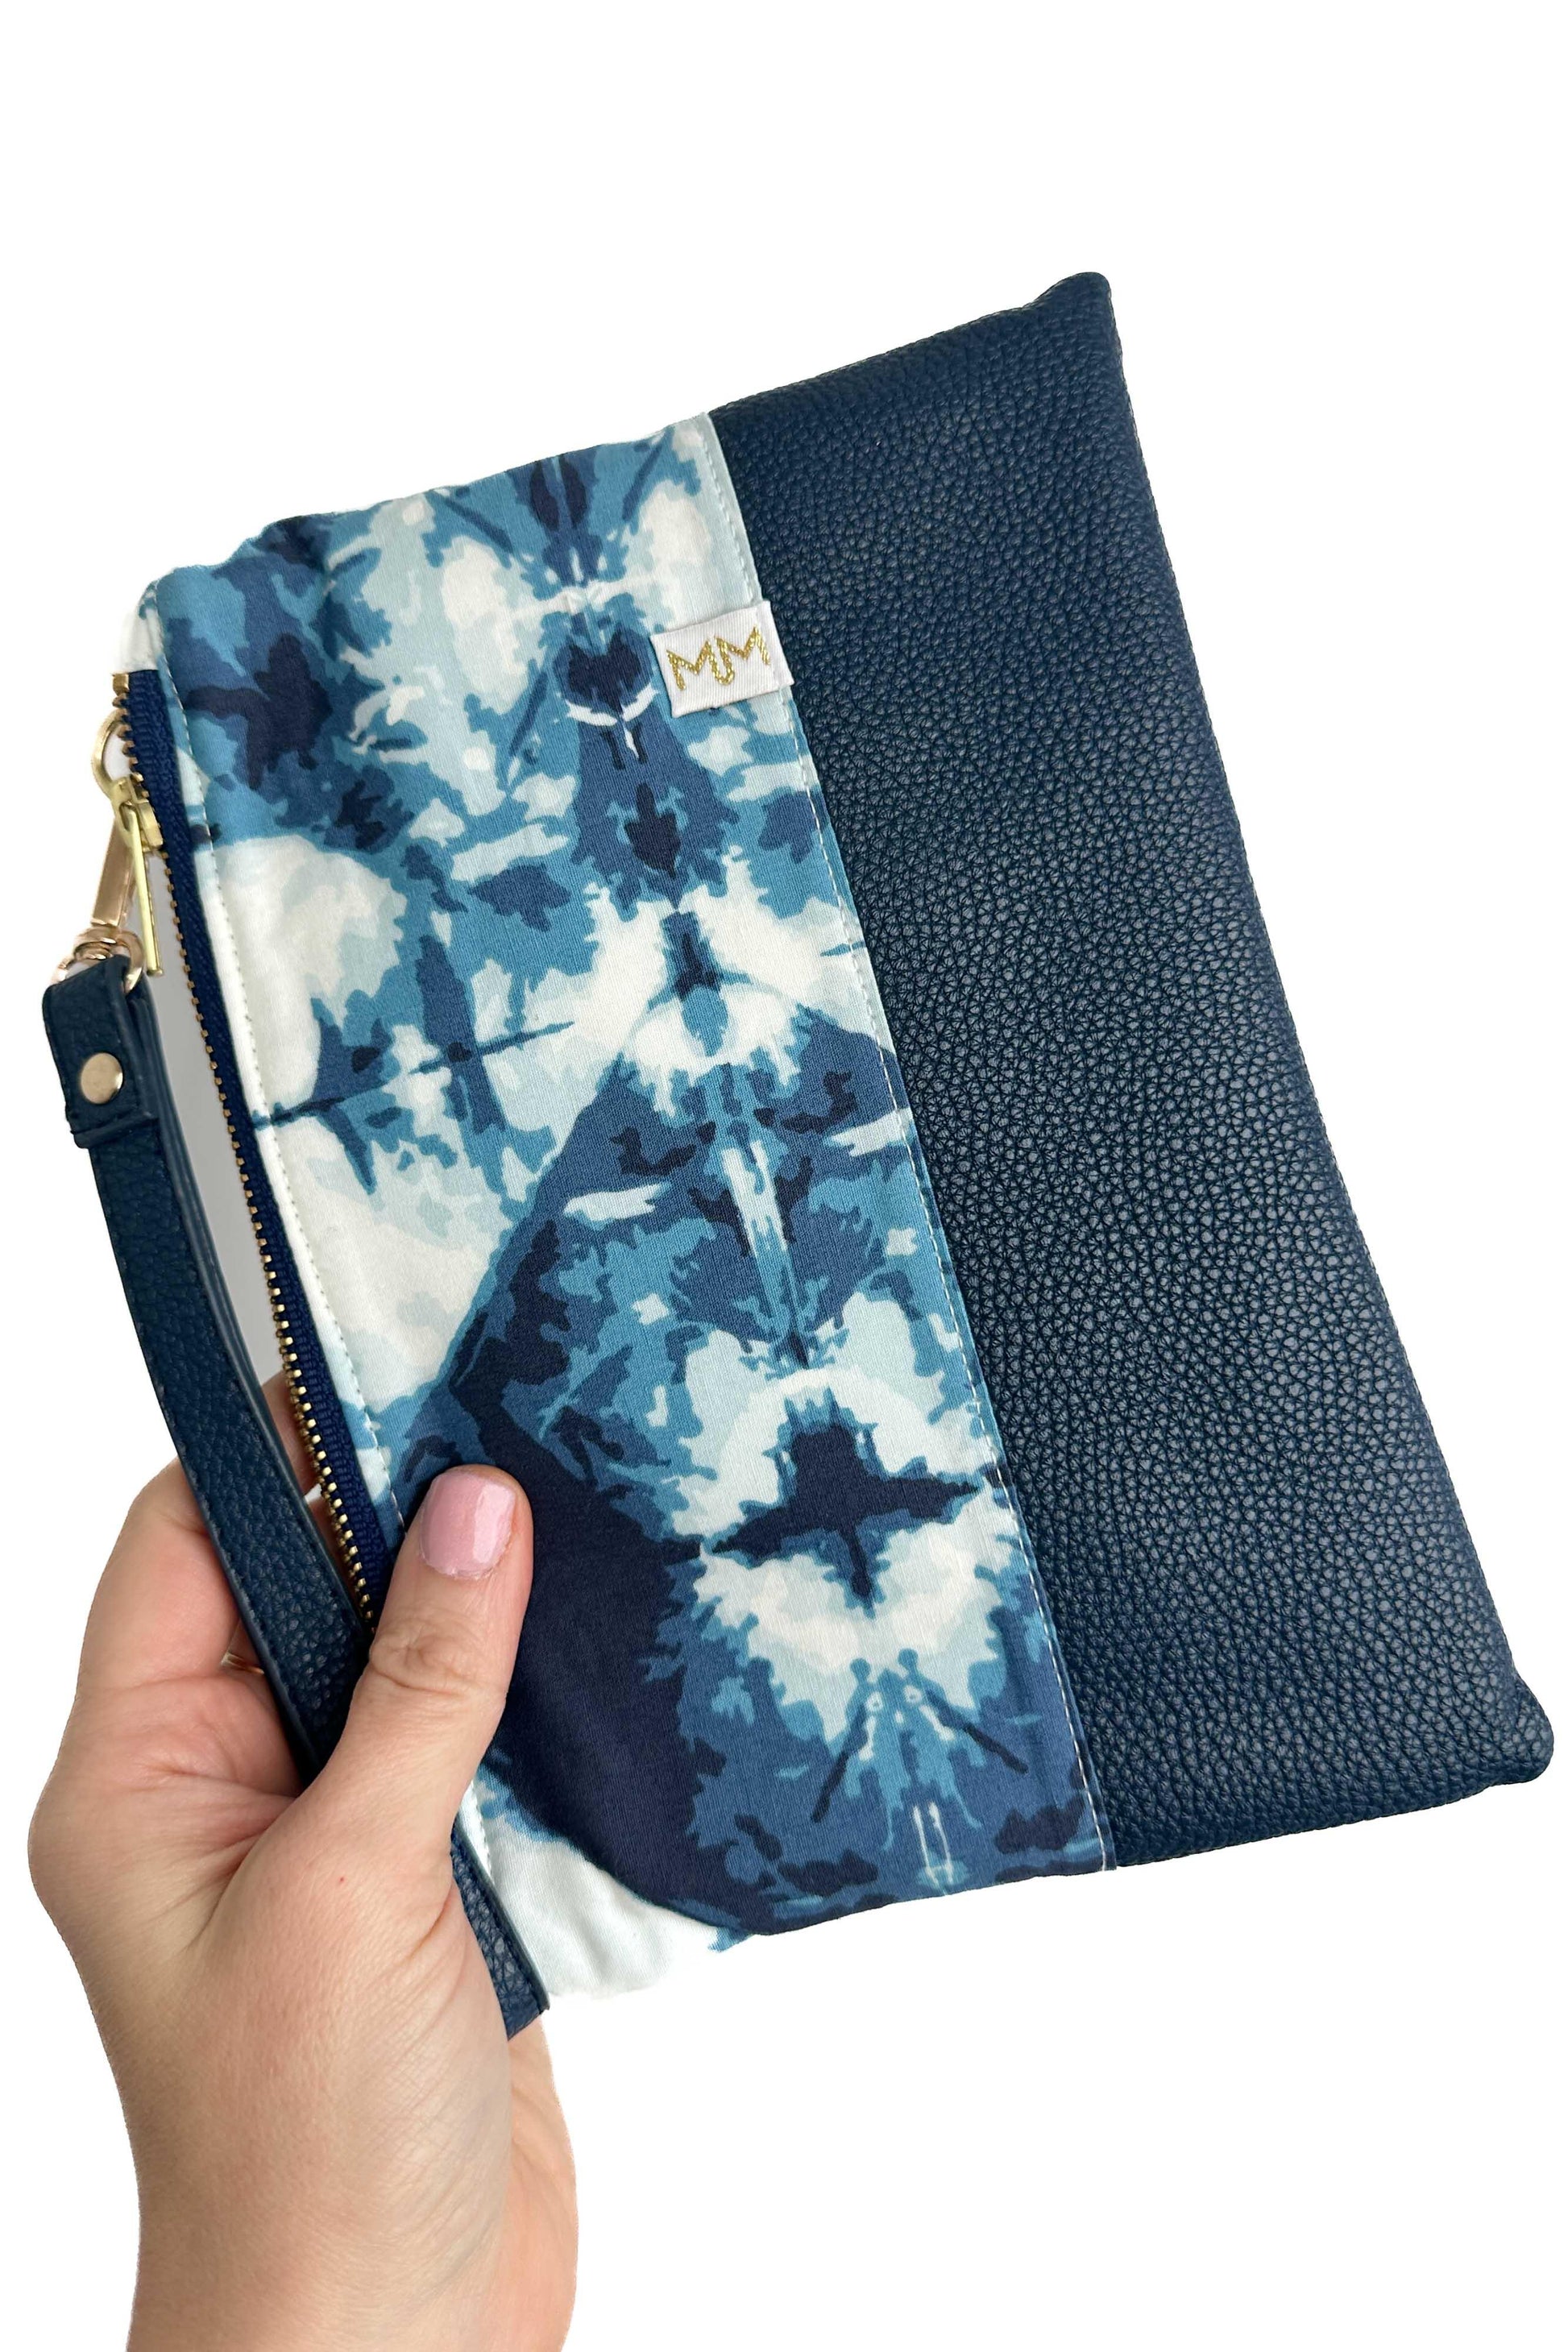 Inky Blues Convertible Crossbody Wristlet+ with Compartments READY TO SHIP - Modern Makerie